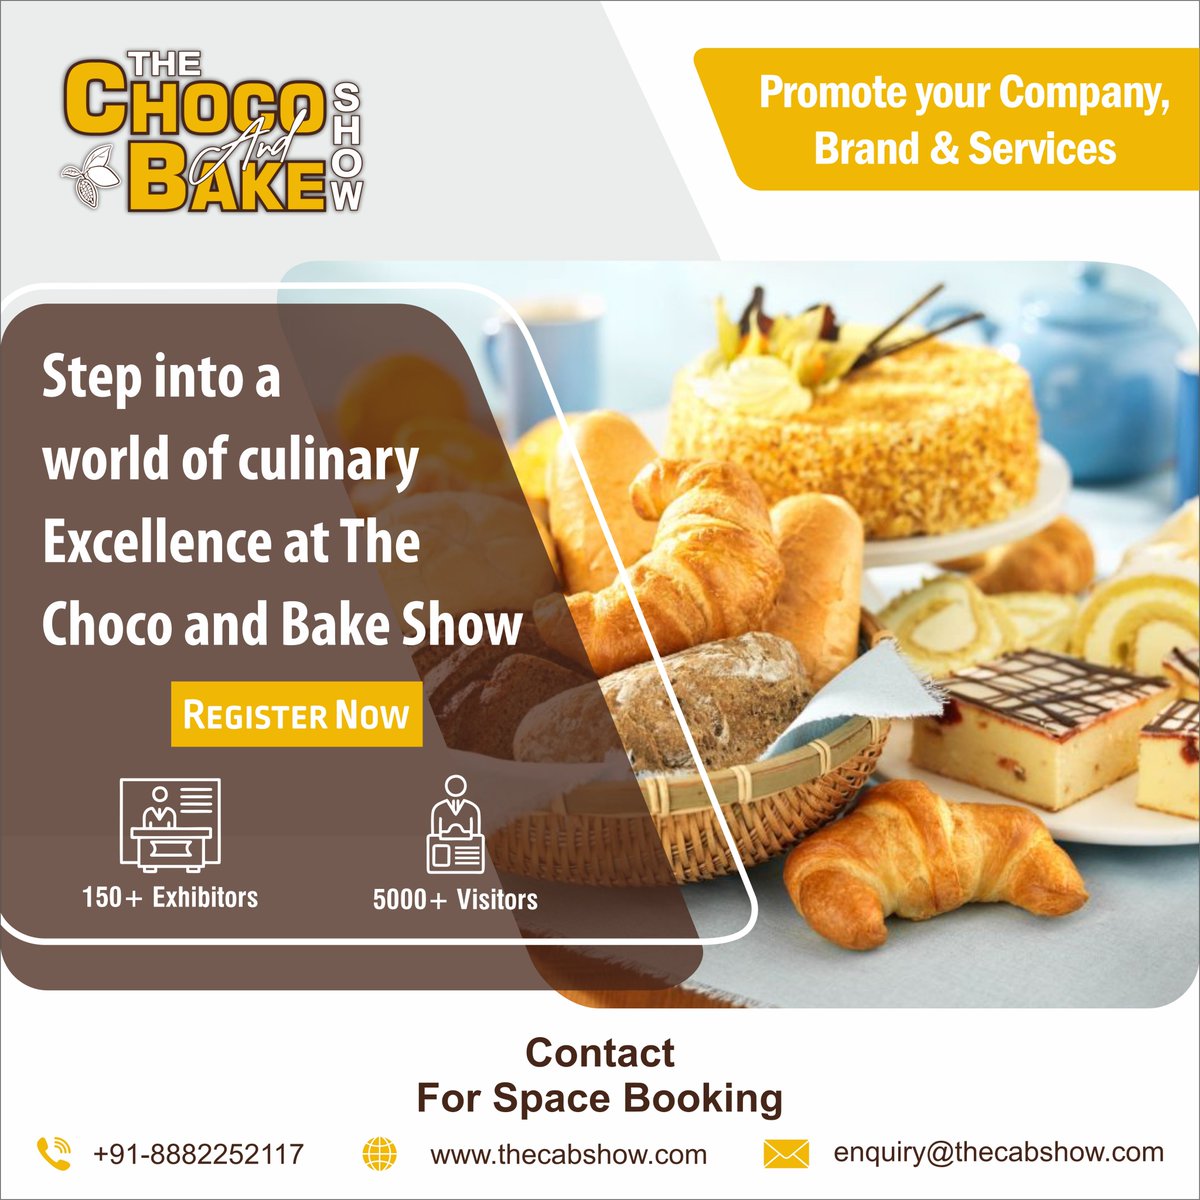 For Space Booking:
Phone. No:- +91-8882252117

#food #india #expo #rice #flourmill #machine 
#upcomingexhibition #packaging #flourbrands #expo #fortified #processing #machinery
#machine #exhibition #indian #technology #millingmachine #makeinindia #explore